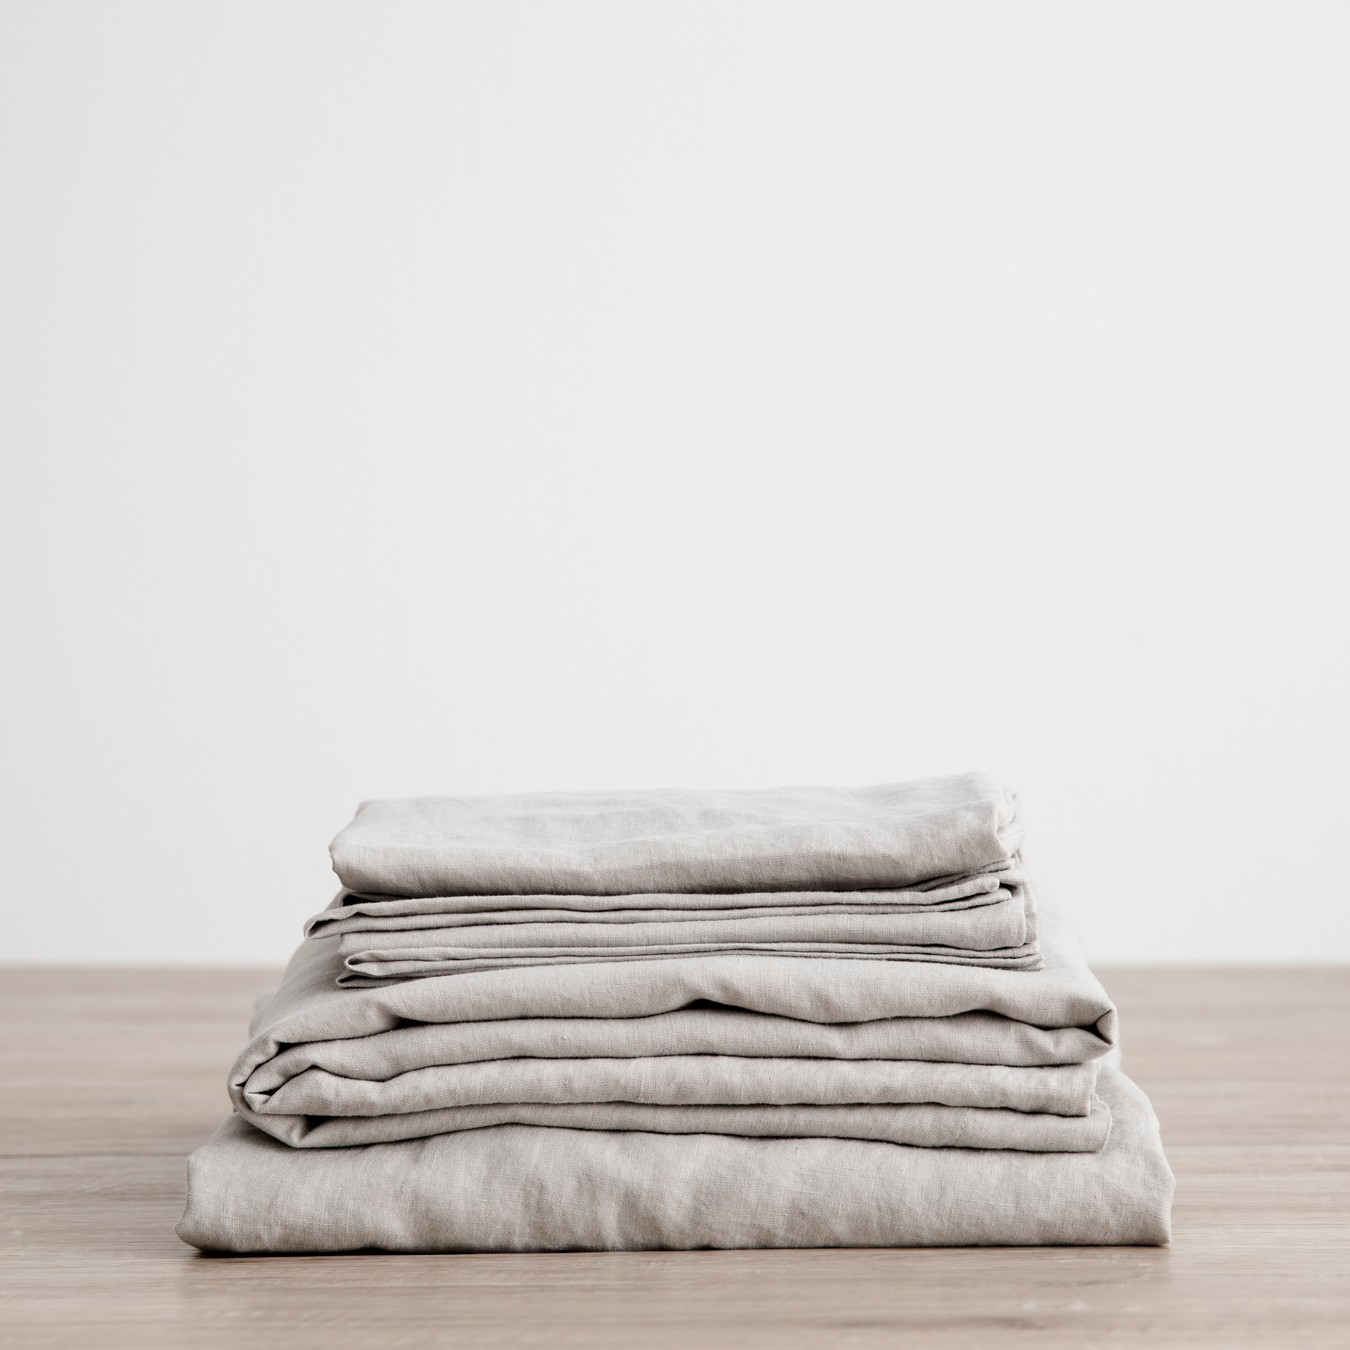 a stack of folded linens on a wooden table